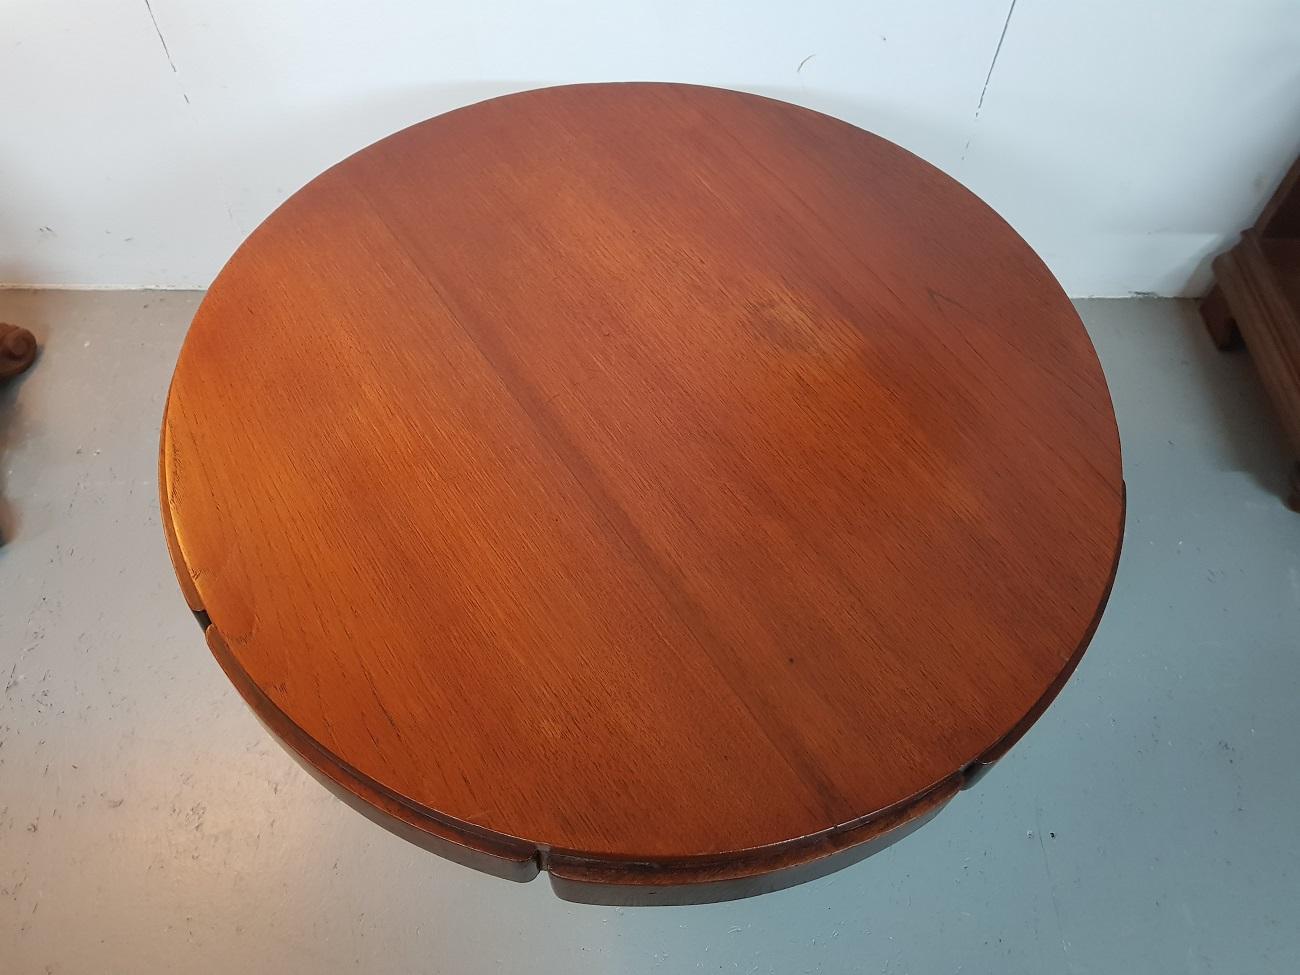 Beautiful designed Art Deco mahogany coffee table standing on a cross base with additional shelves and branded Deerns, made in the 1st half of 20th century. It has a small spot on the surface and wear consistent age and use.

The measurements